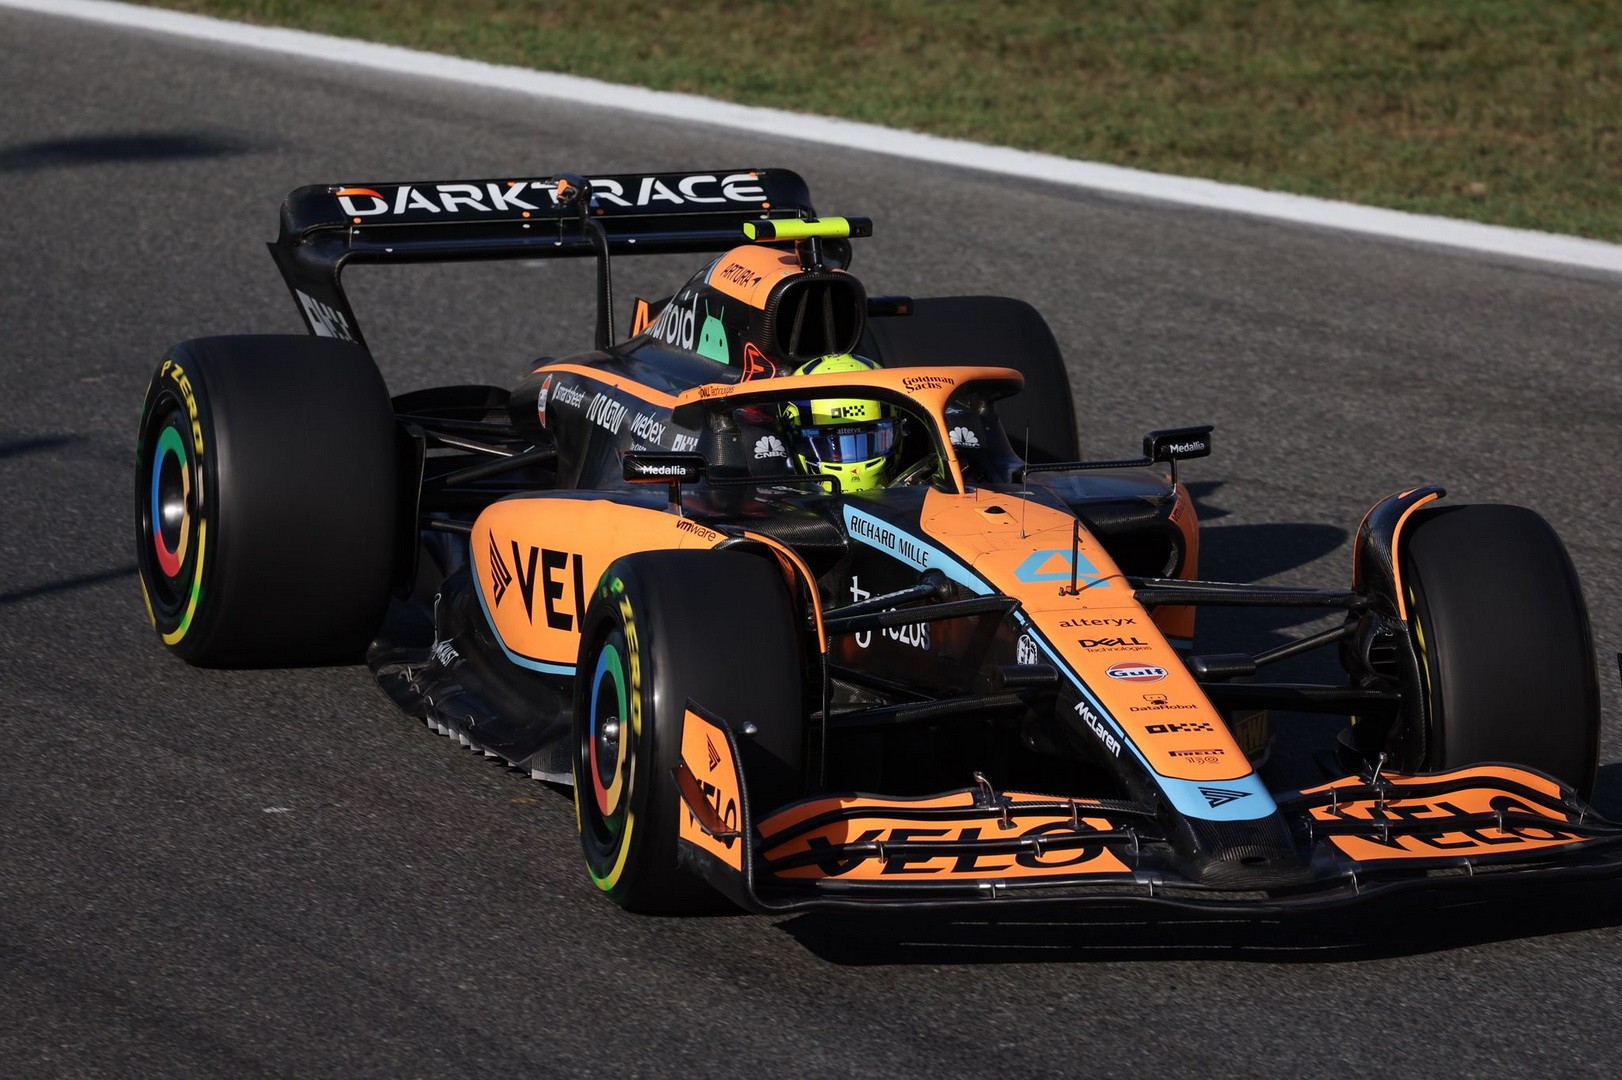 McLaren Looking to Take Big Step Forward with Evolutionary 2023 F1 Car